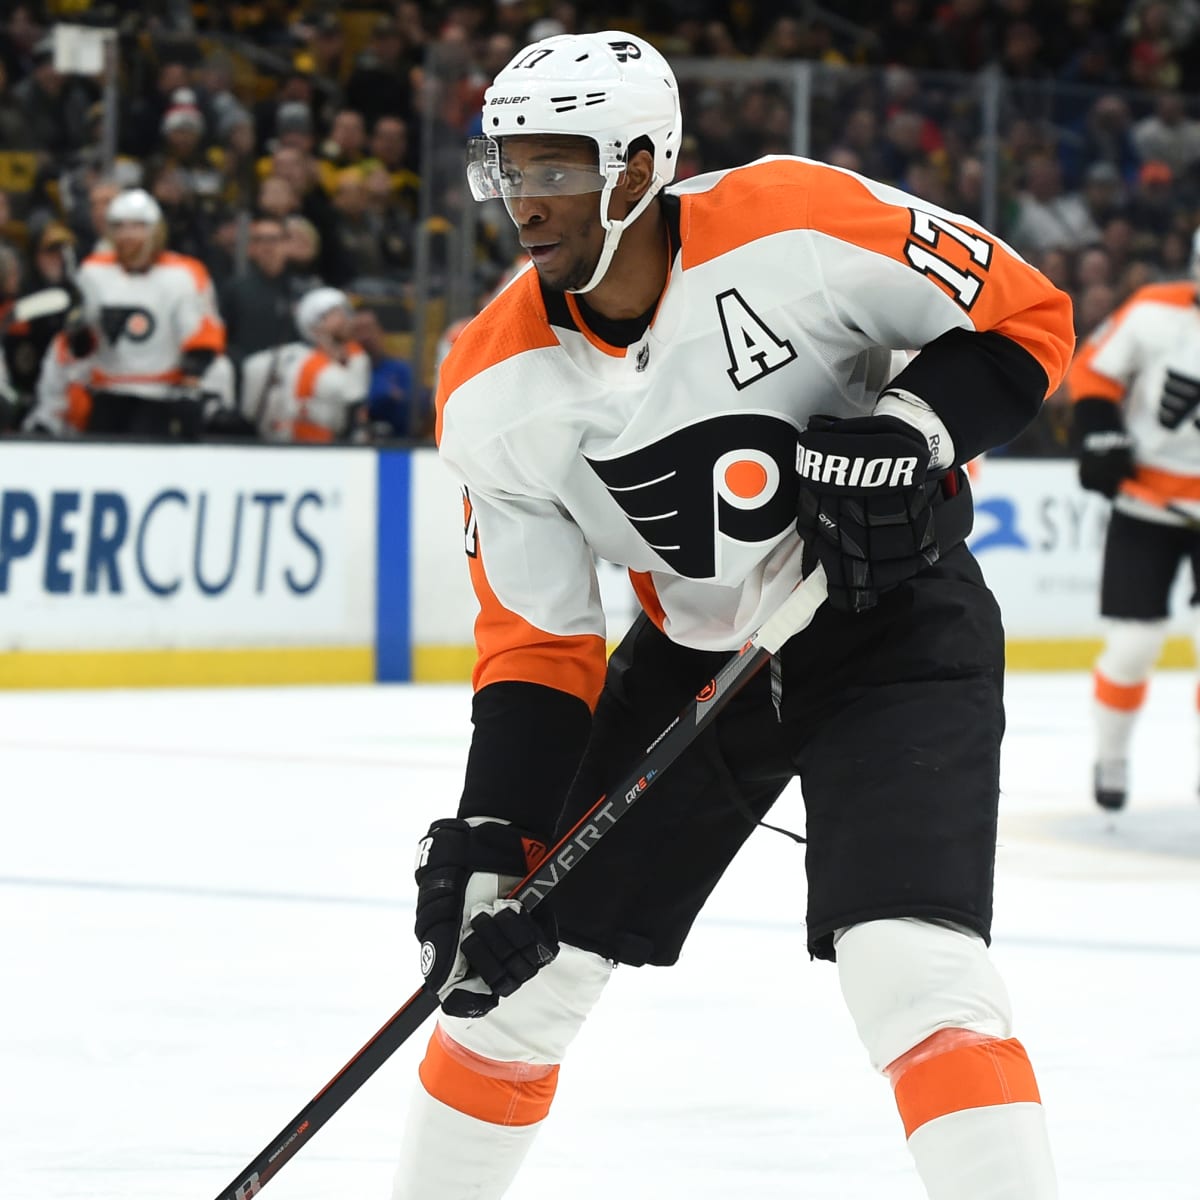 Flyers' Wayne Simmonds is trying to add some color to hockey